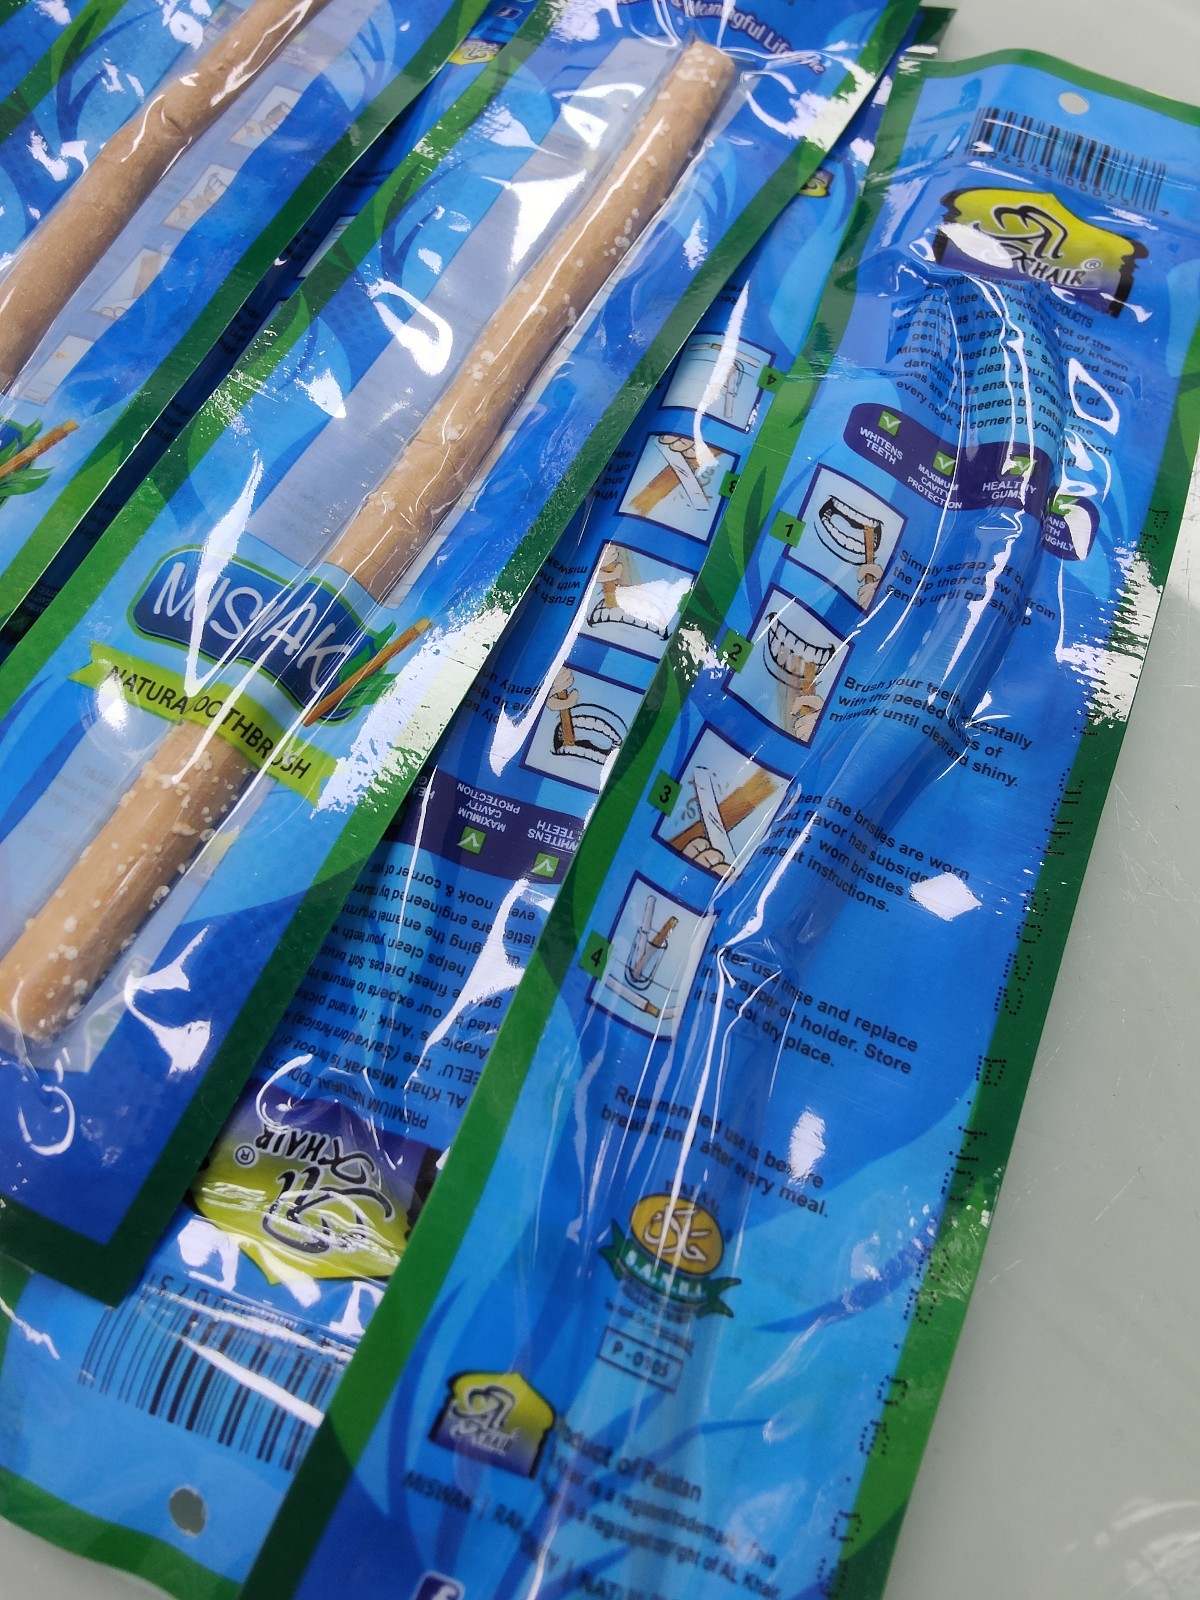 Discover the benefits of Miswak (Siwak) for oral hygiene. Our organic Miswak sticks promote healthy teeth and gums, teeth whitening, and fresh breath. Shop now!